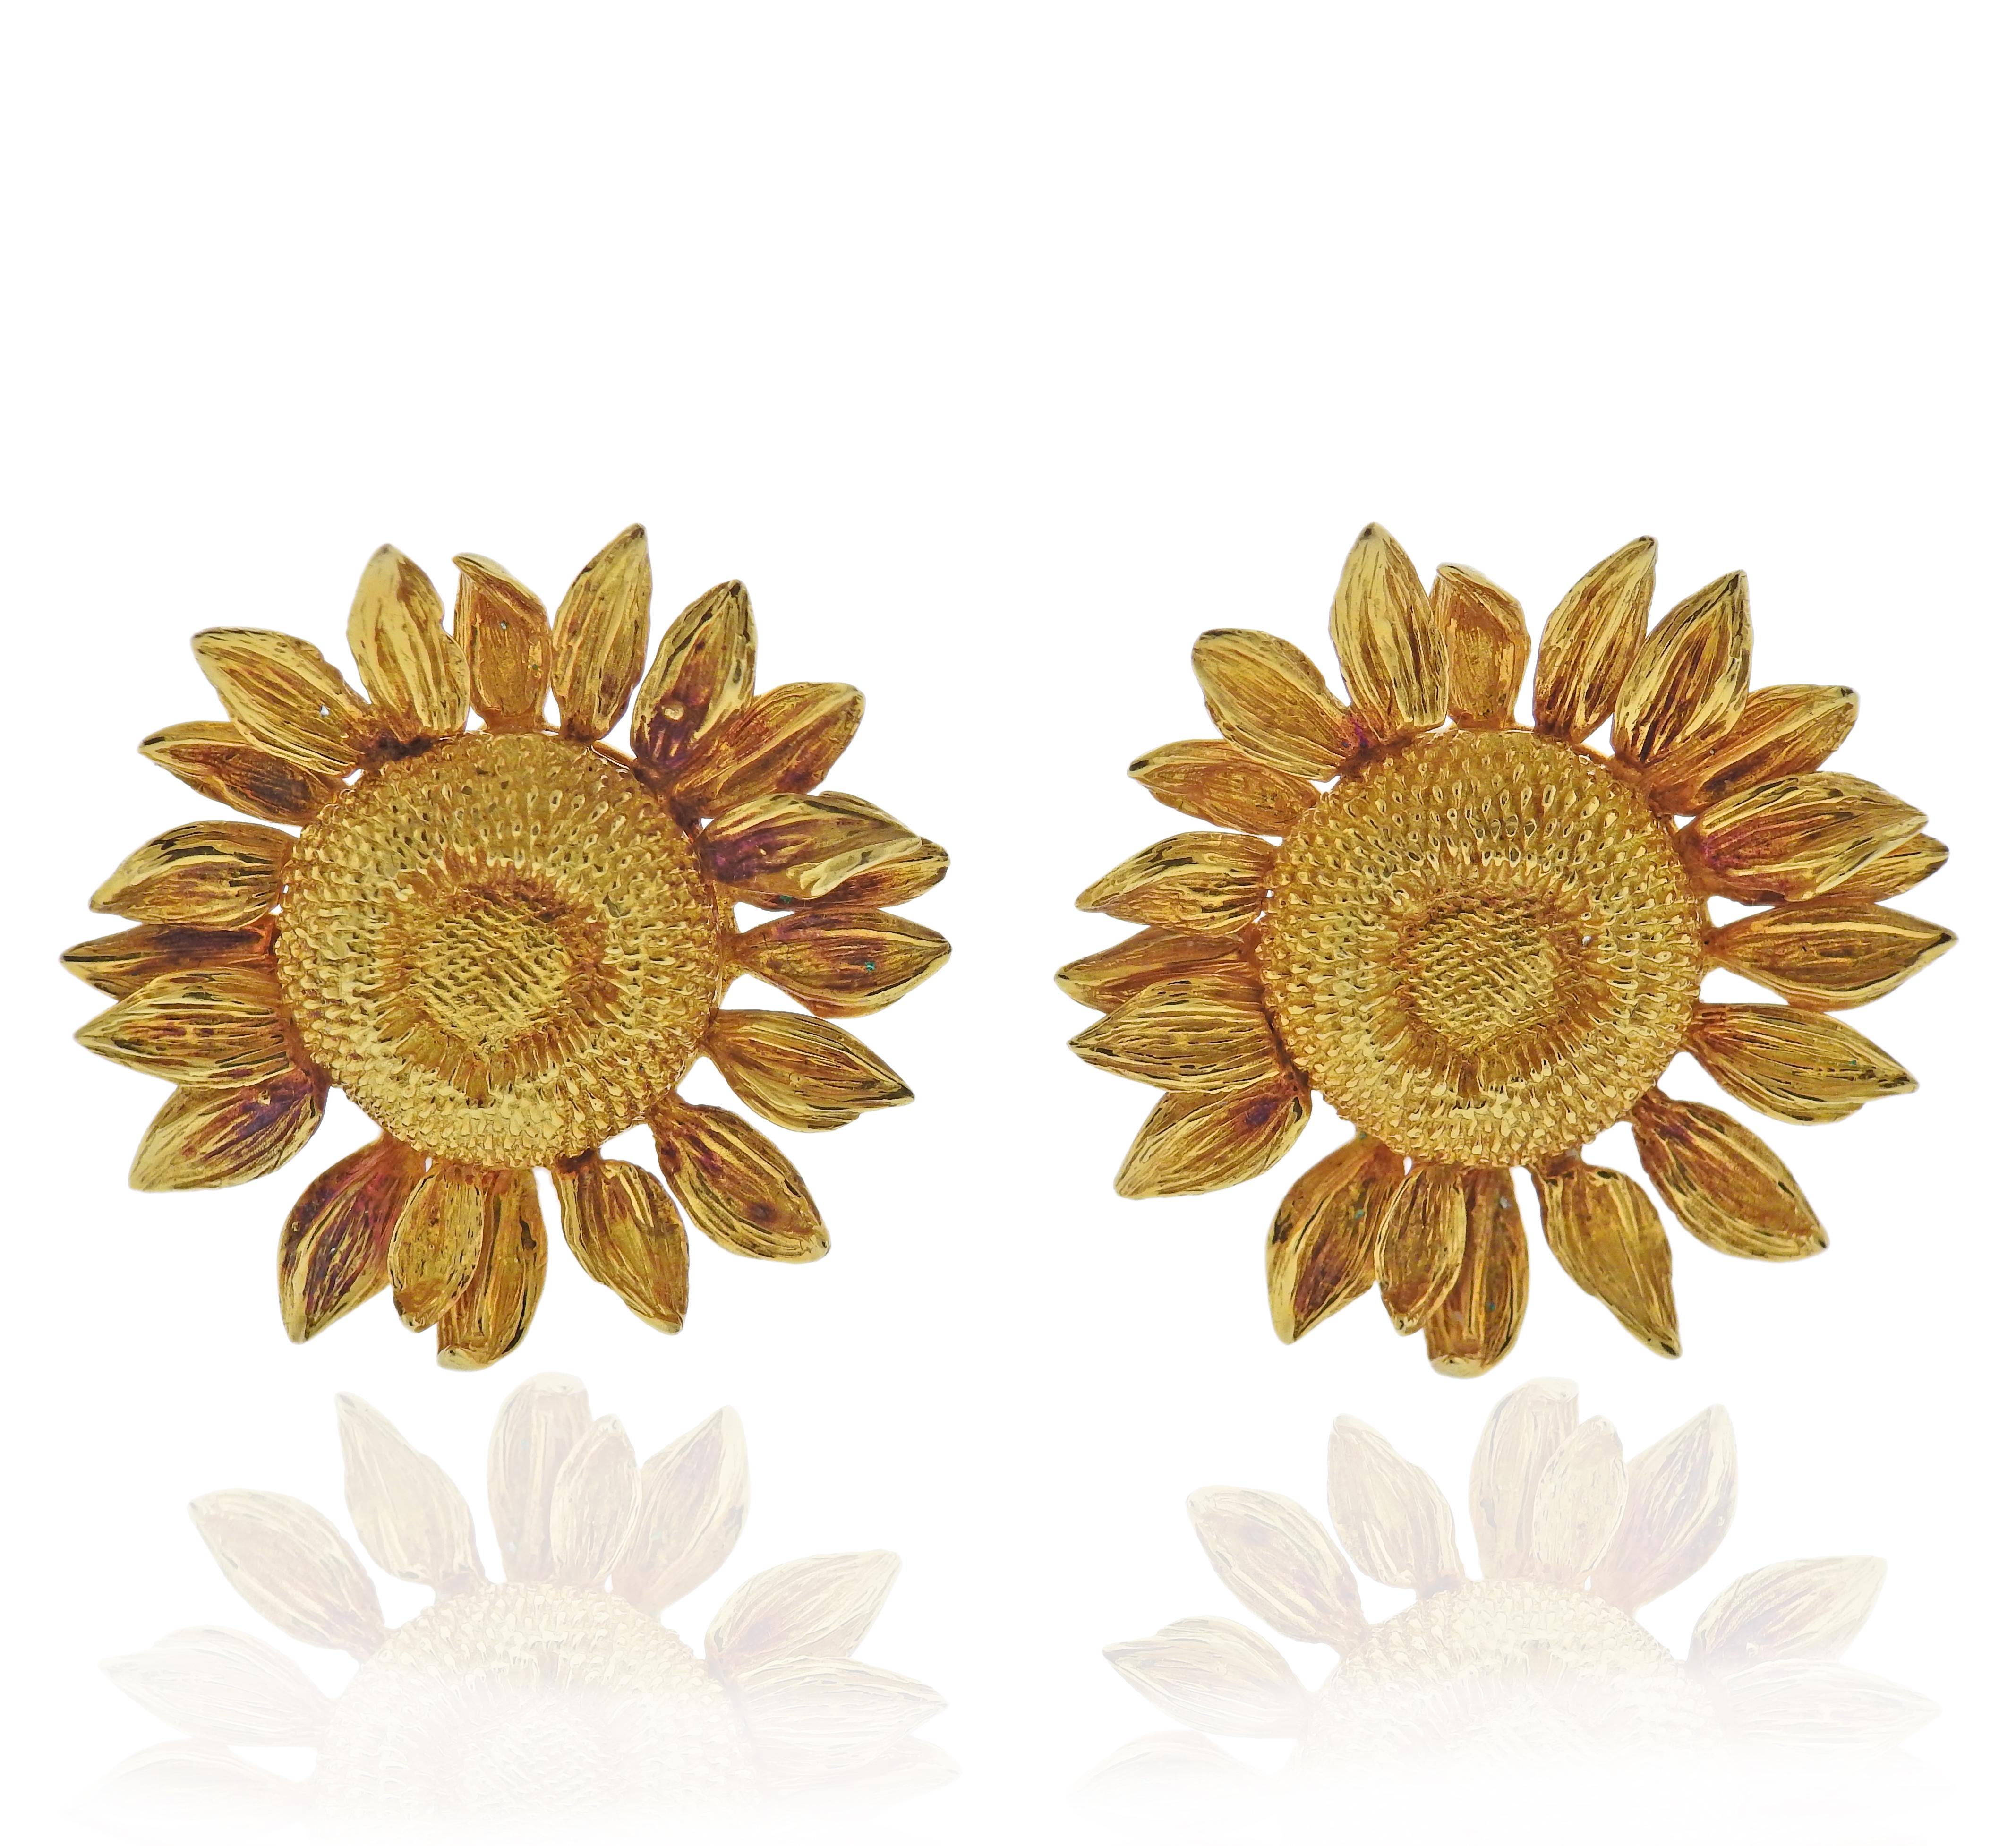 Pair of 18k gold sunflower earrings by Asprey. Measure 32mm in diameter. Marked Asprey, English marks and 750. Weight: 23.5 grams. 